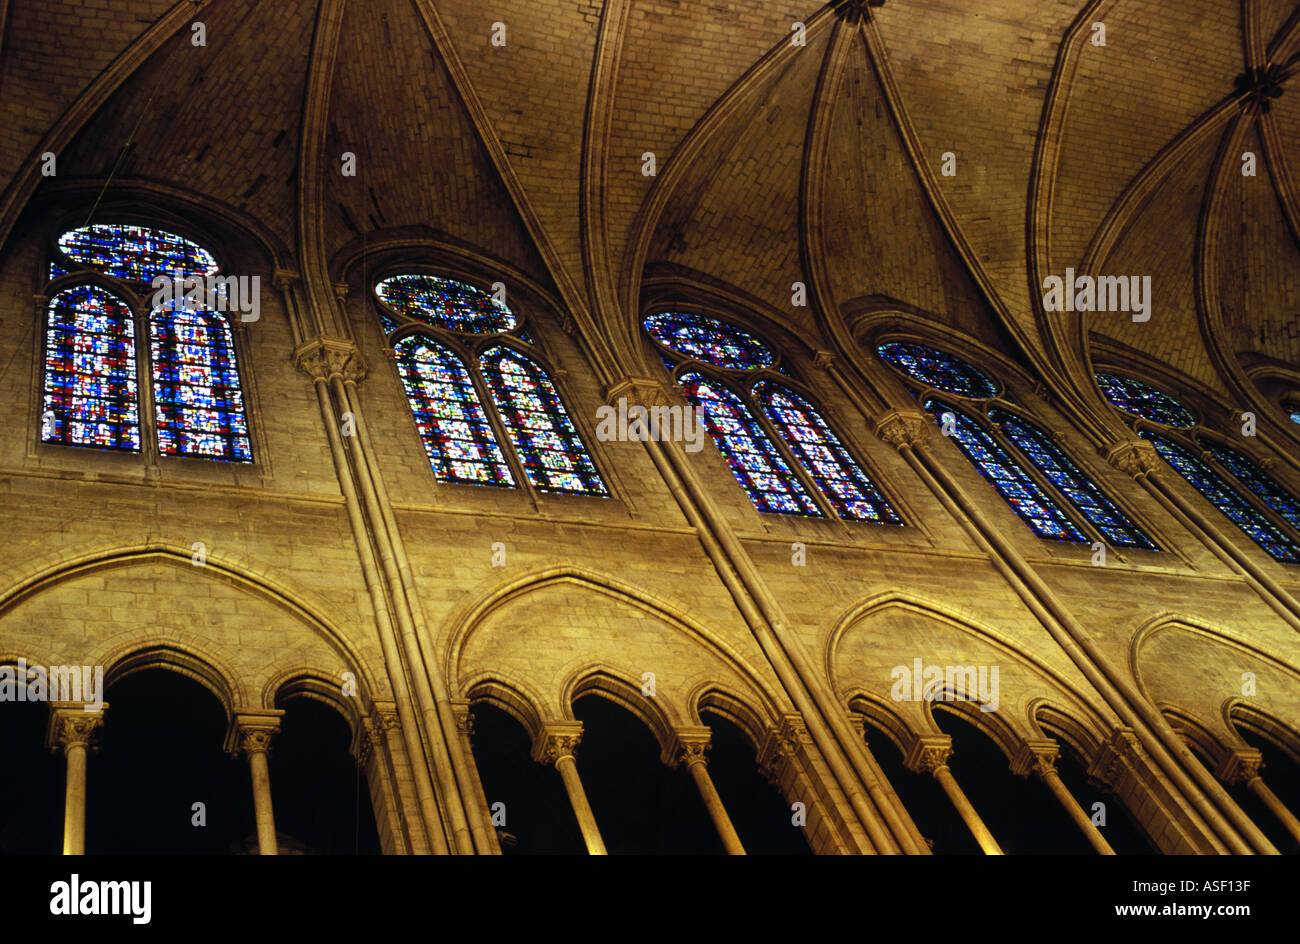 An interior view of Notre Dame Cathedral in Paris FranceThe ceiling of Notre Dame in Paris, France, prior to the devastating April 15, 2019 fire. Stock Photo